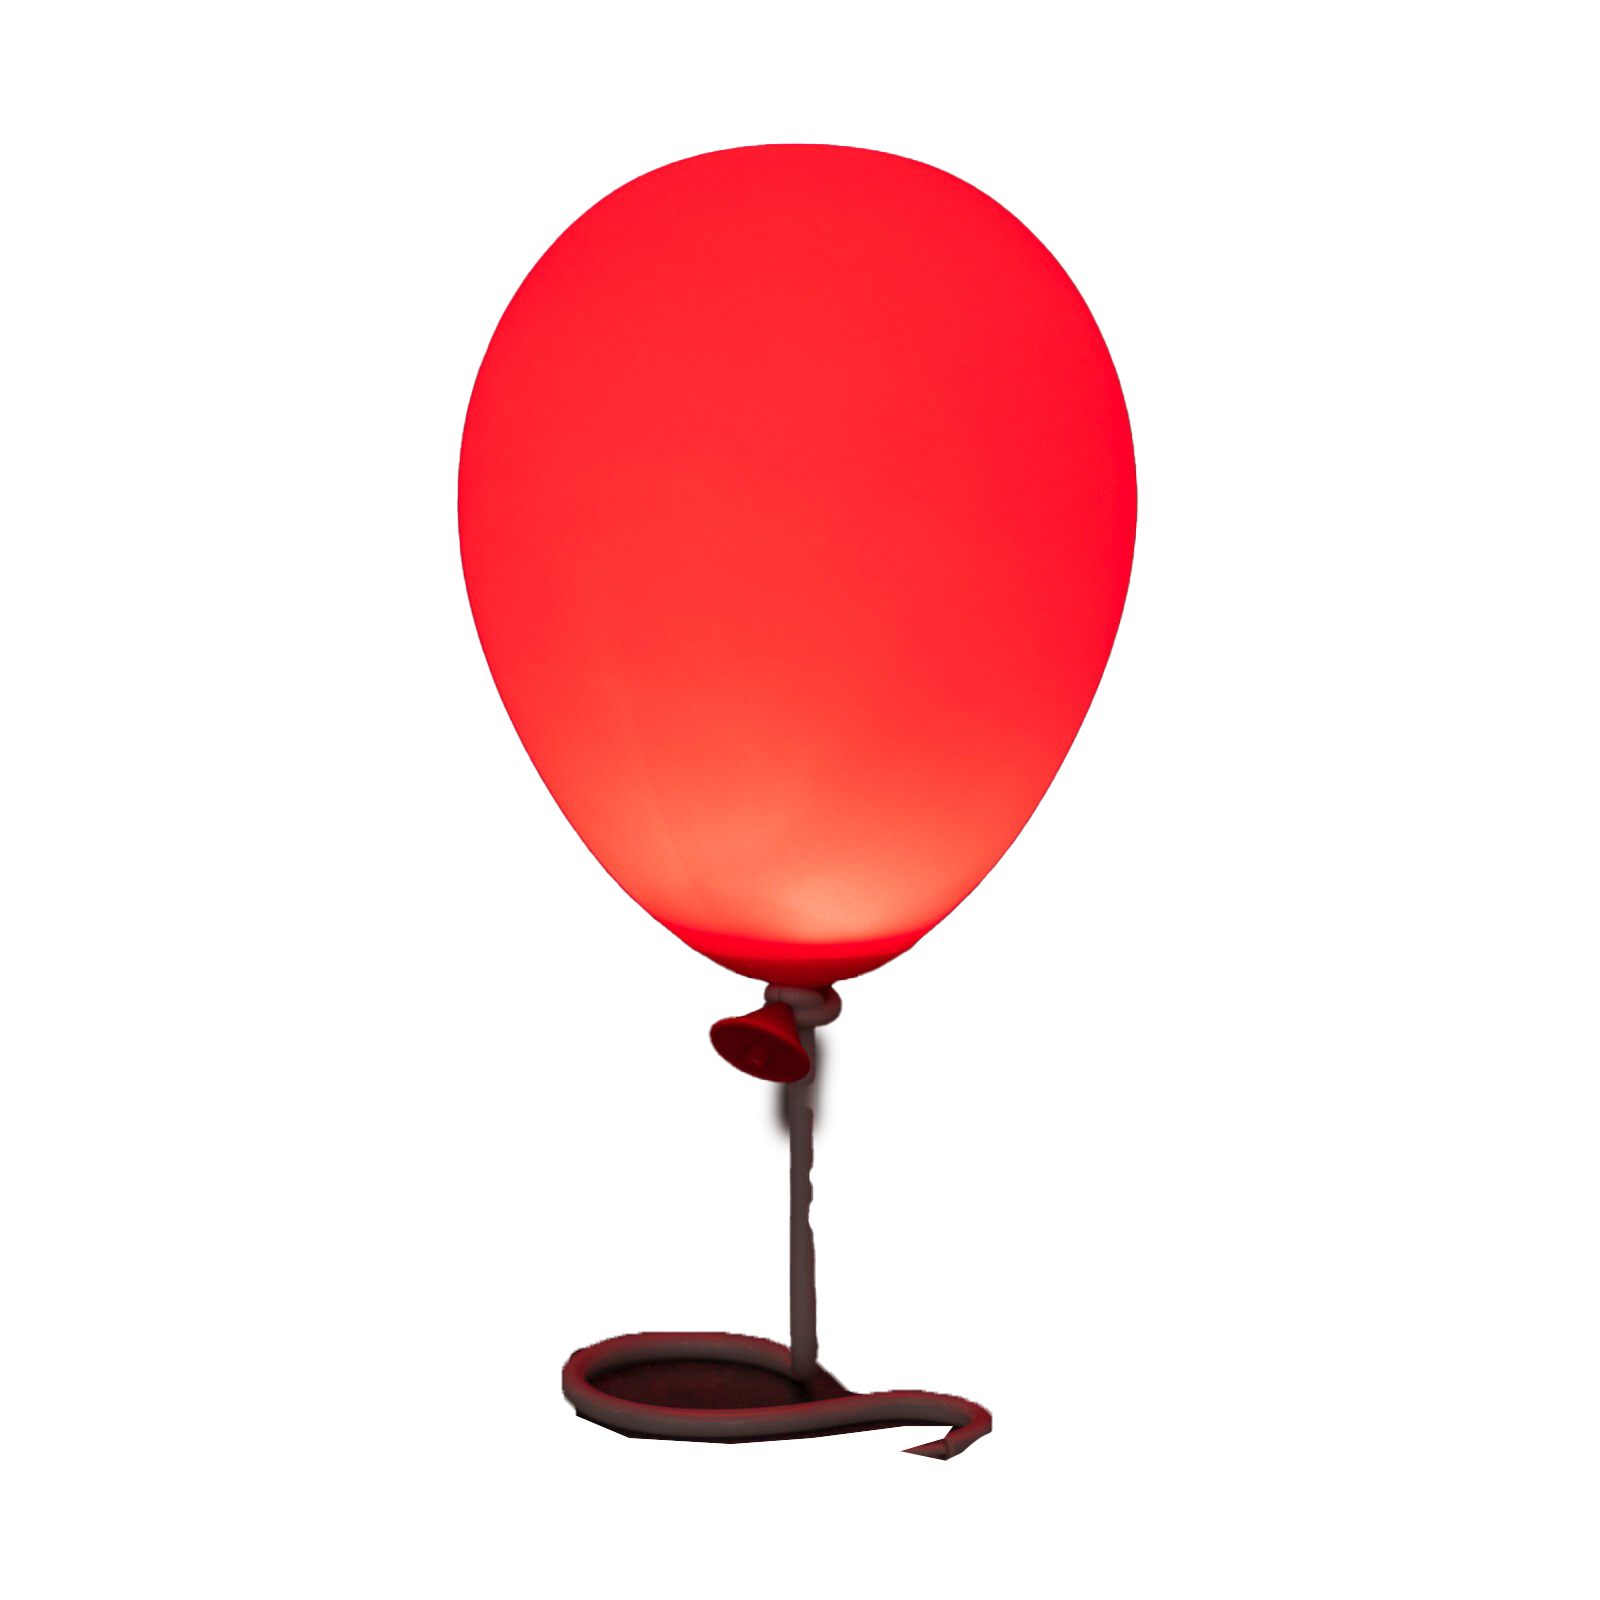 Pennywise Balloon PNG Télécharger Gratuit